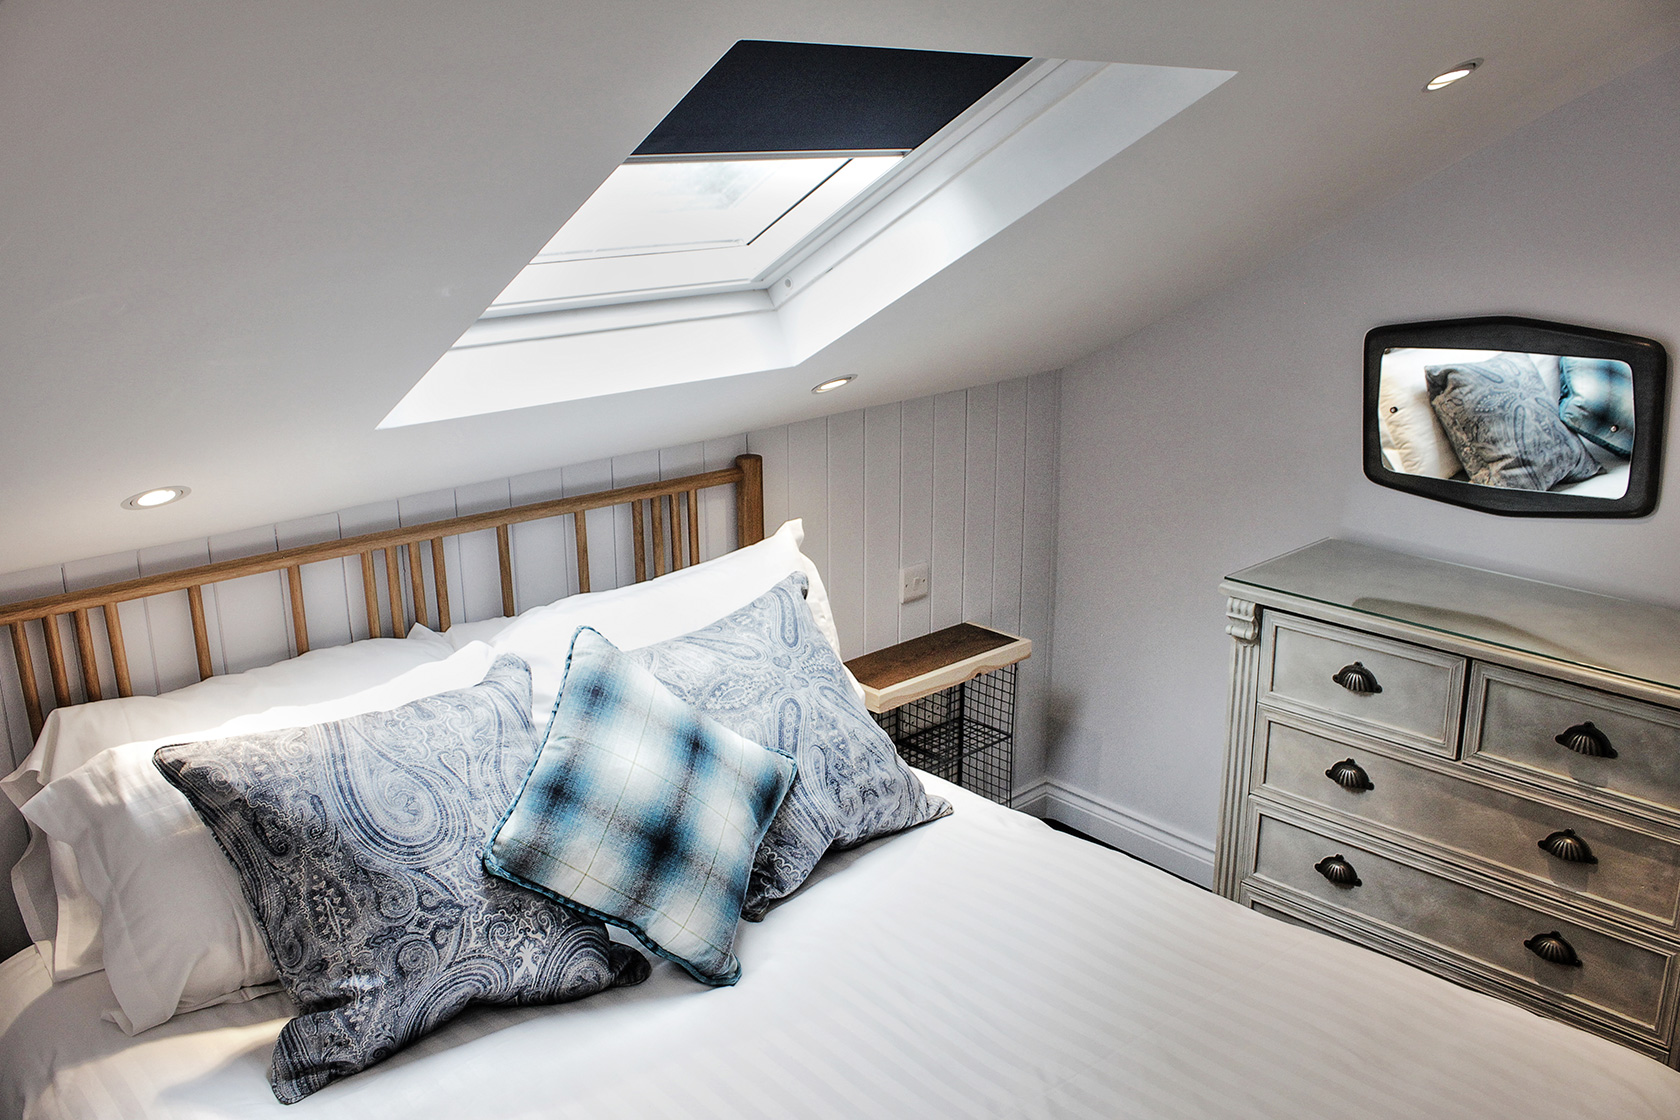 Inside the loft guest bedroom close to Kendal in the Lake District